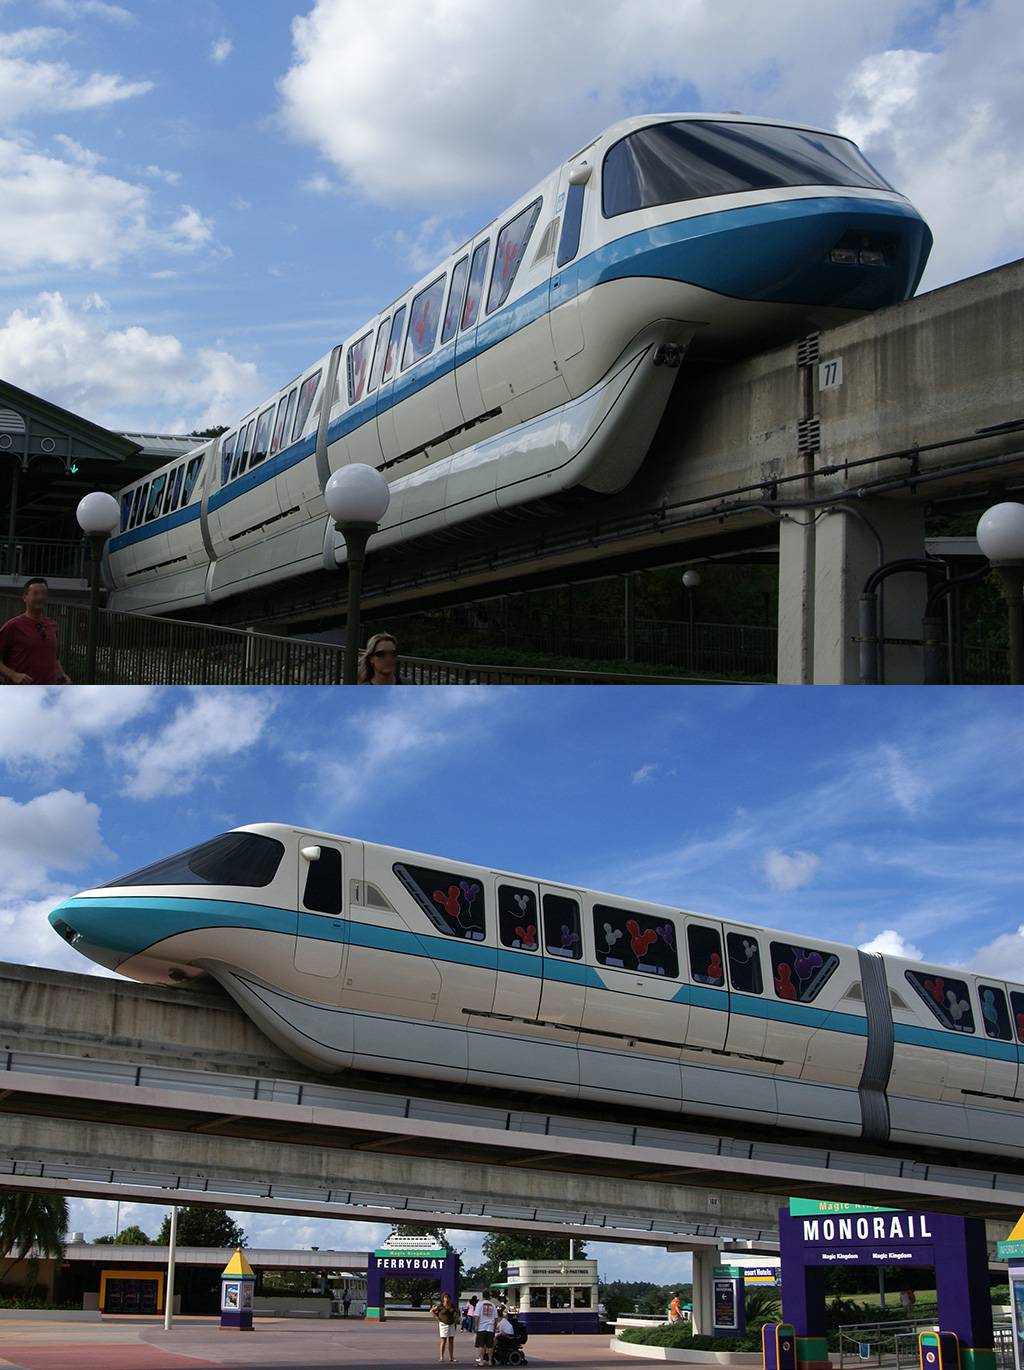 A comparison of Monorail Blue and Monorail Teal shot on the same day with the same camera. (Blue is above, Teal below)